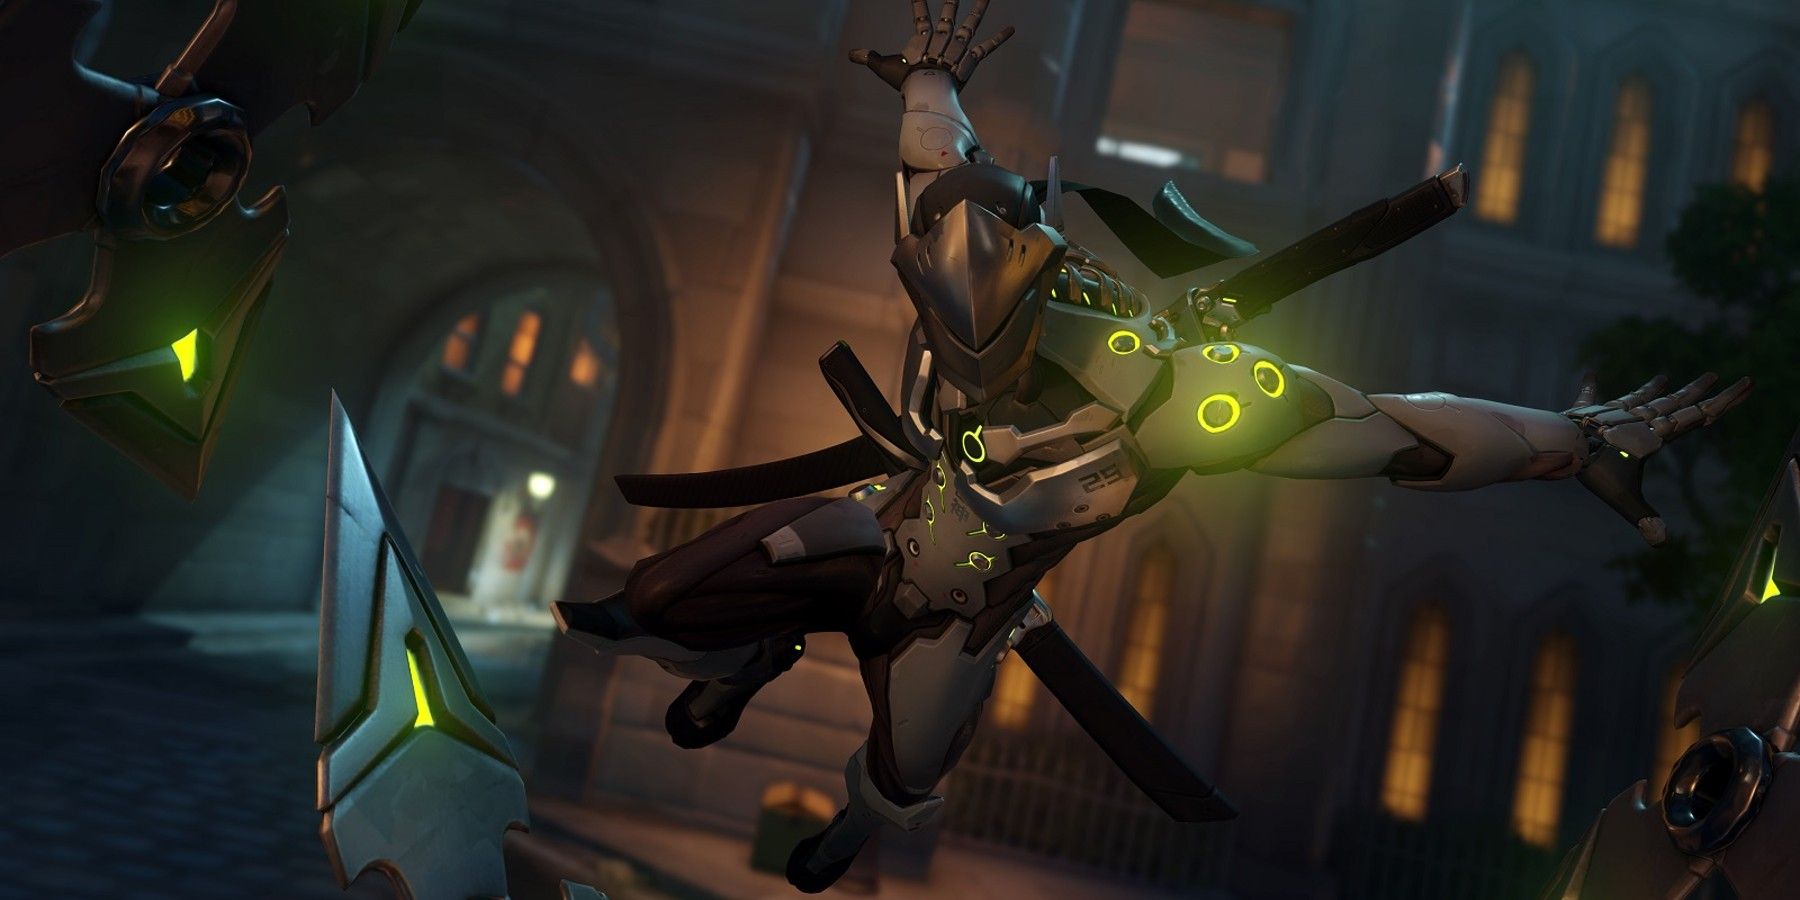 Incredible Overwatch Clip Shows Genji Deflecting Ana's Grenade from Across the Map